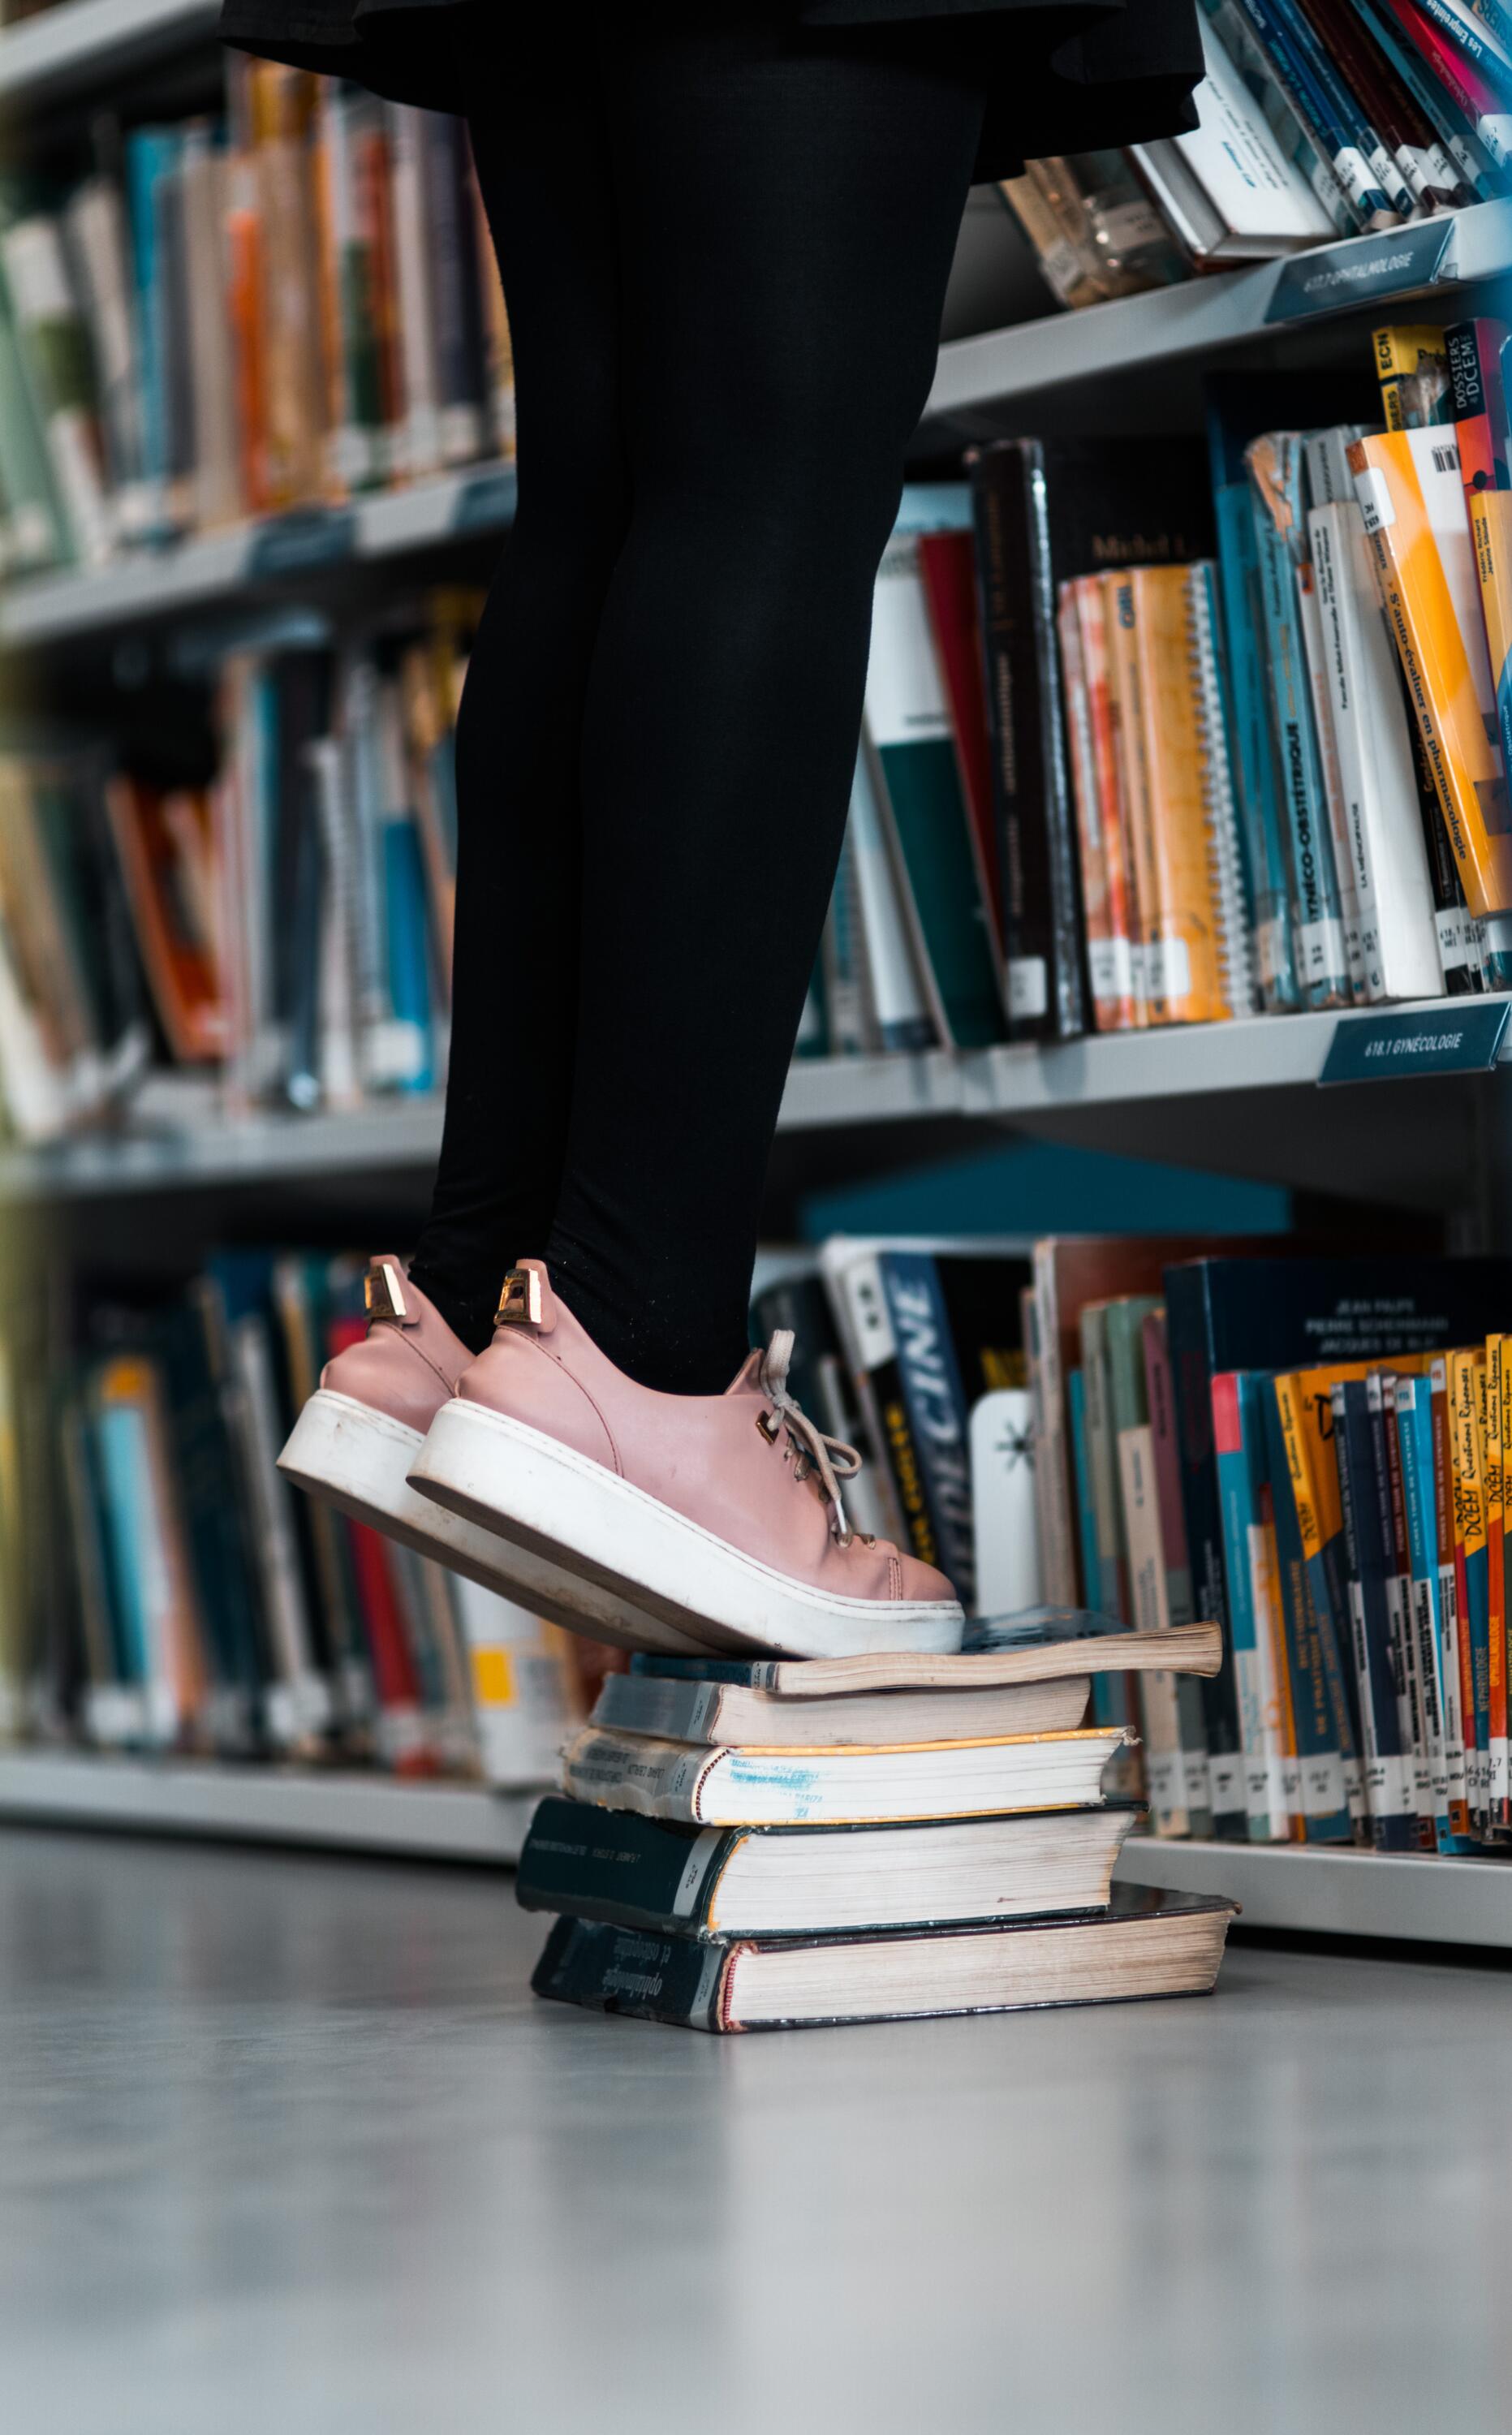 standing on books to see above